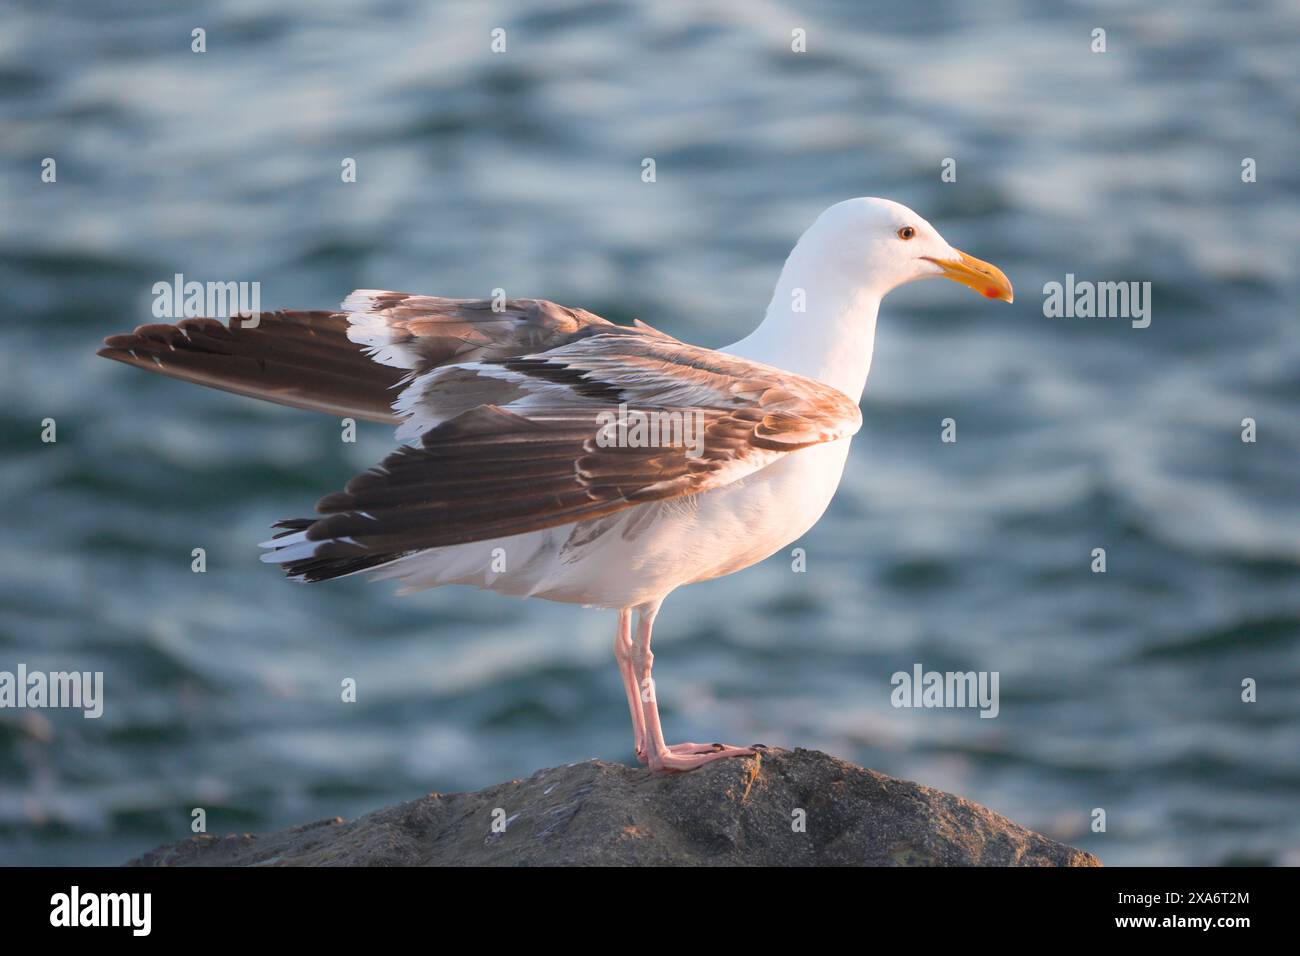 A white bird perched on rock by rippling water Stock Photo